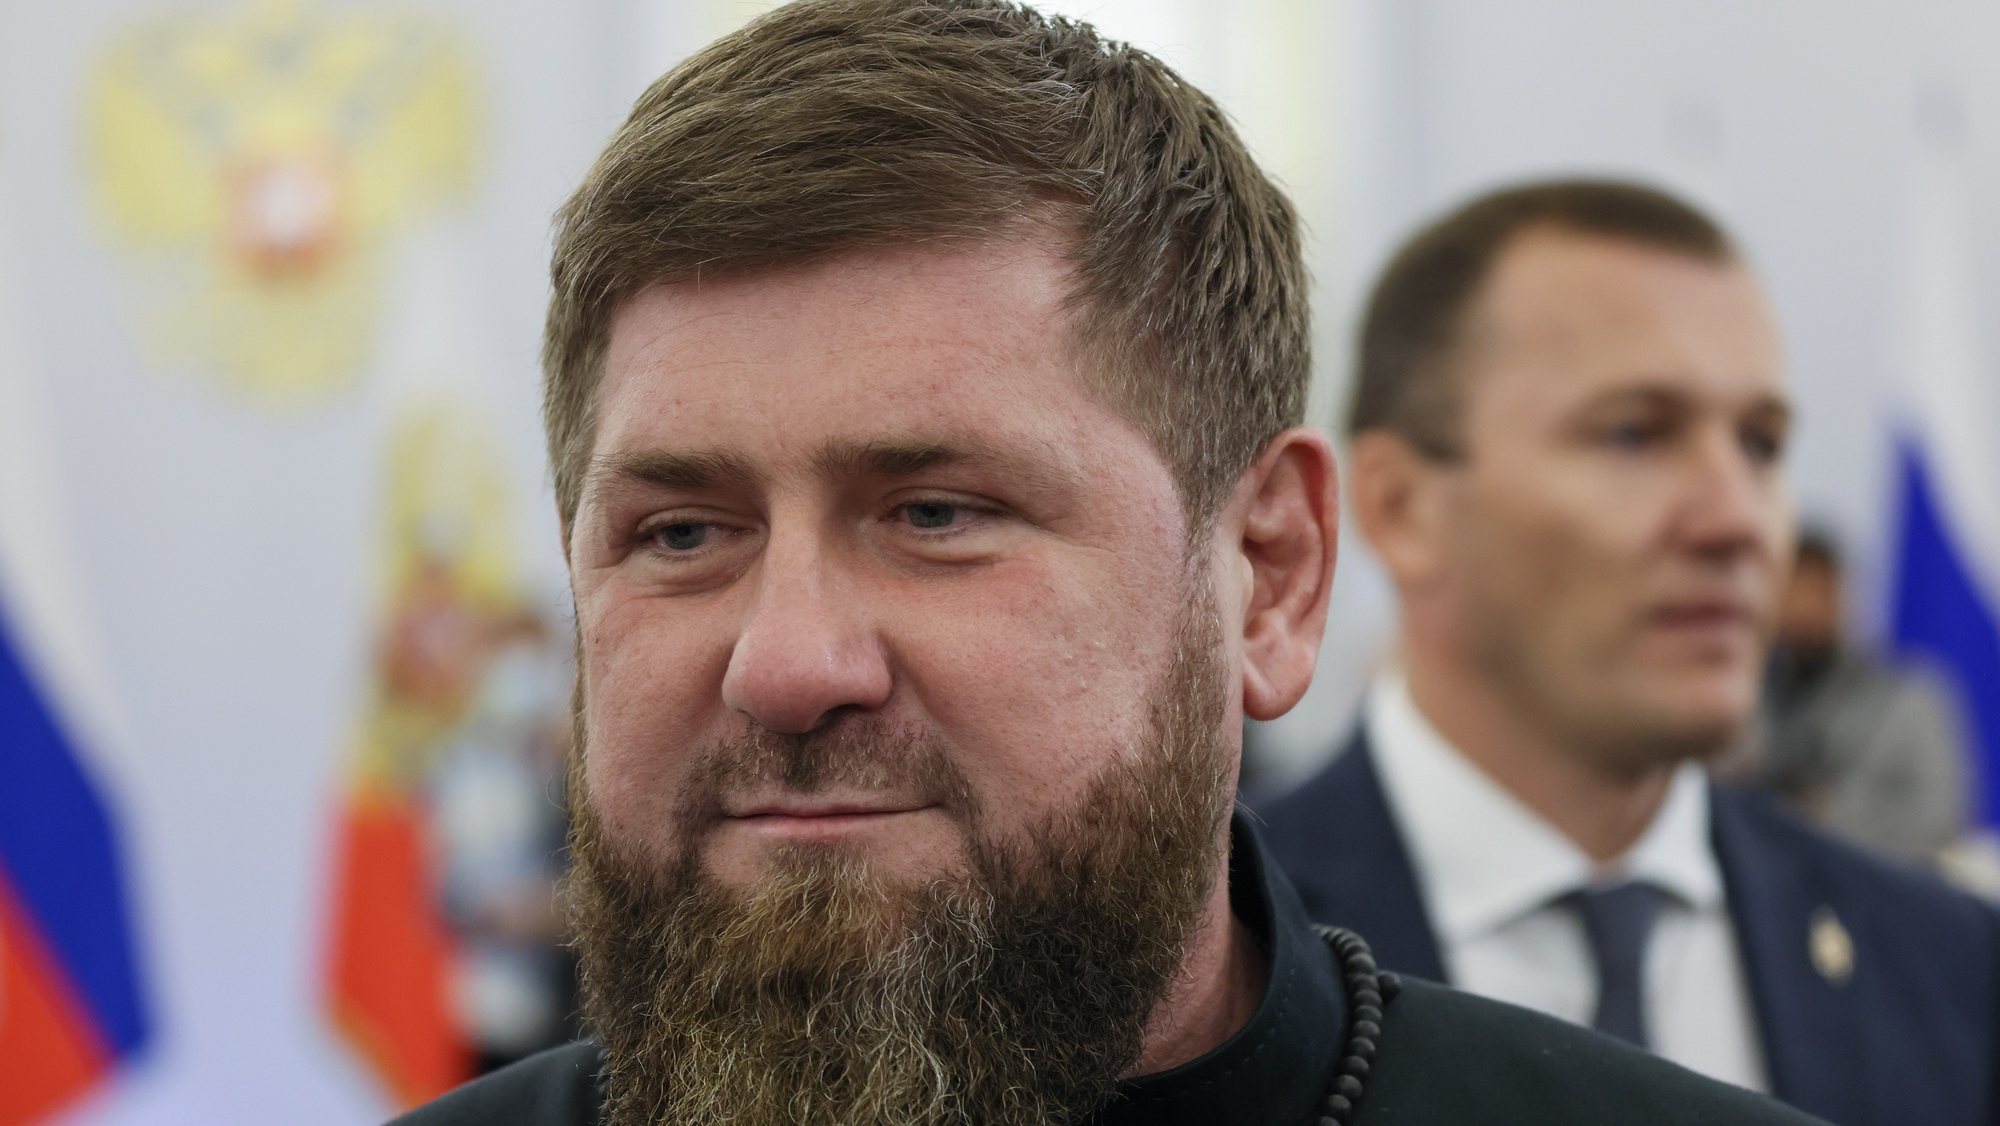 epa10215716 Chechnya&#039;s regional President Ramzan Kadyrov before a ceremony to sign treaties on new territories&#039; accession to Russia at the Grand Kremlin Palace in Moscow, Russia, 30 September 2022. From 23 to 27 September, residents of the self-proclaimed Luhansk and Donetsk People&#039;s Republics as well as the Russian-controlled areas of the Kherson and Zaporizhzhia regions of Ukraine voted in a so-called &#039;referendum&#039; to join the Russian Federation.  EPA/MIKHAIL METZEL/SPUTNIK/KREMLIN POOL MANDATORY CREDIT